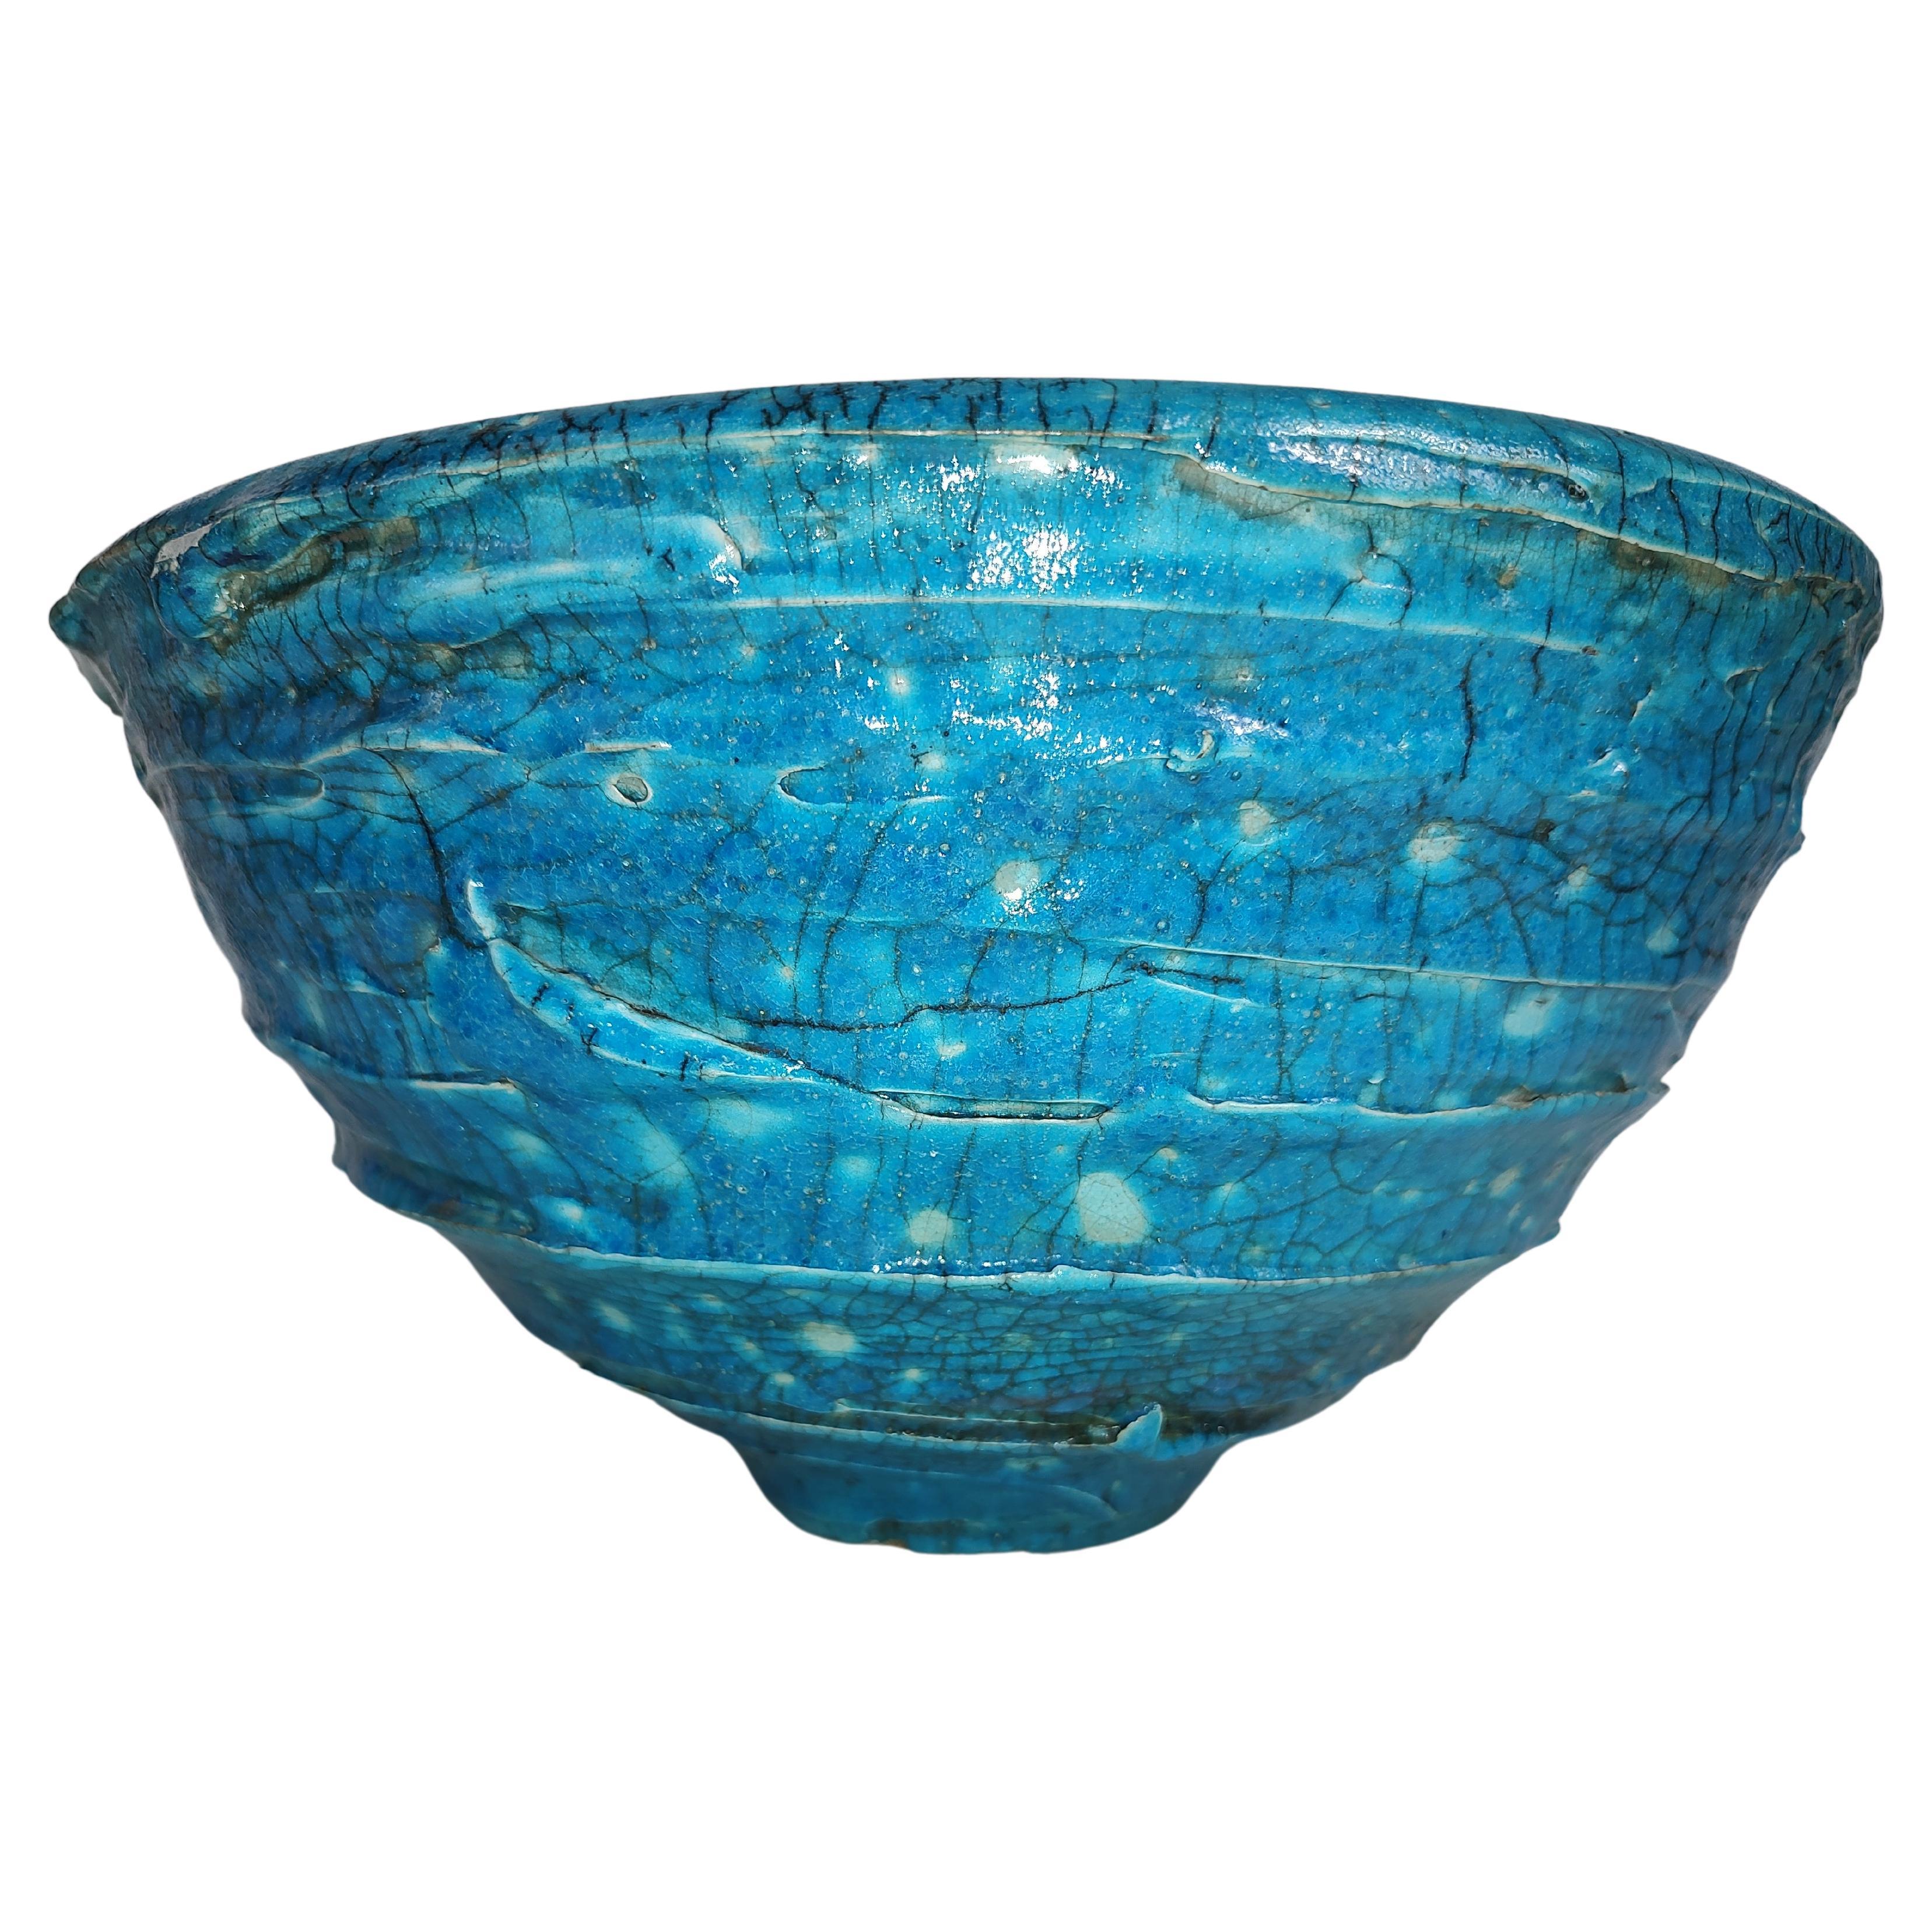 Mid-Century Modern Sculptural Large Art Pottery Bowl in Turquoise Blue